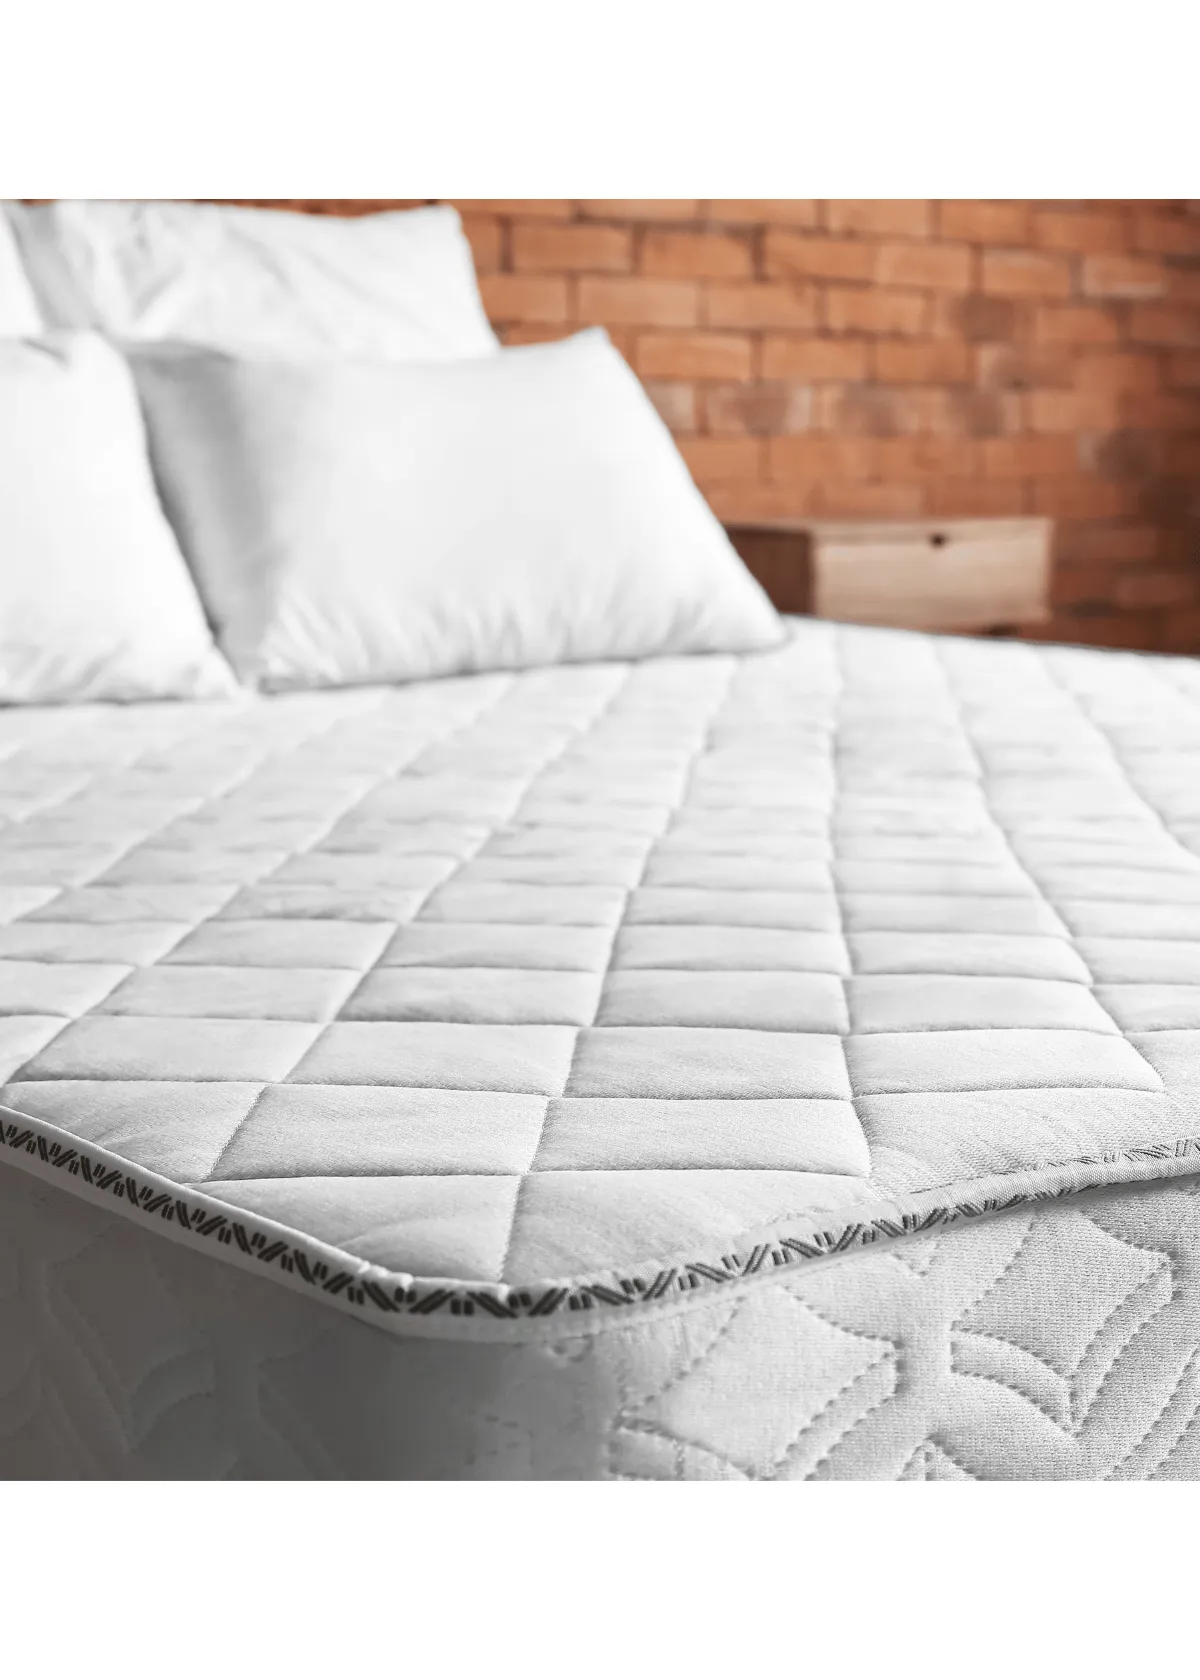 "Medium Firm Mattress| Features and Prices of Top-Rated Brands"